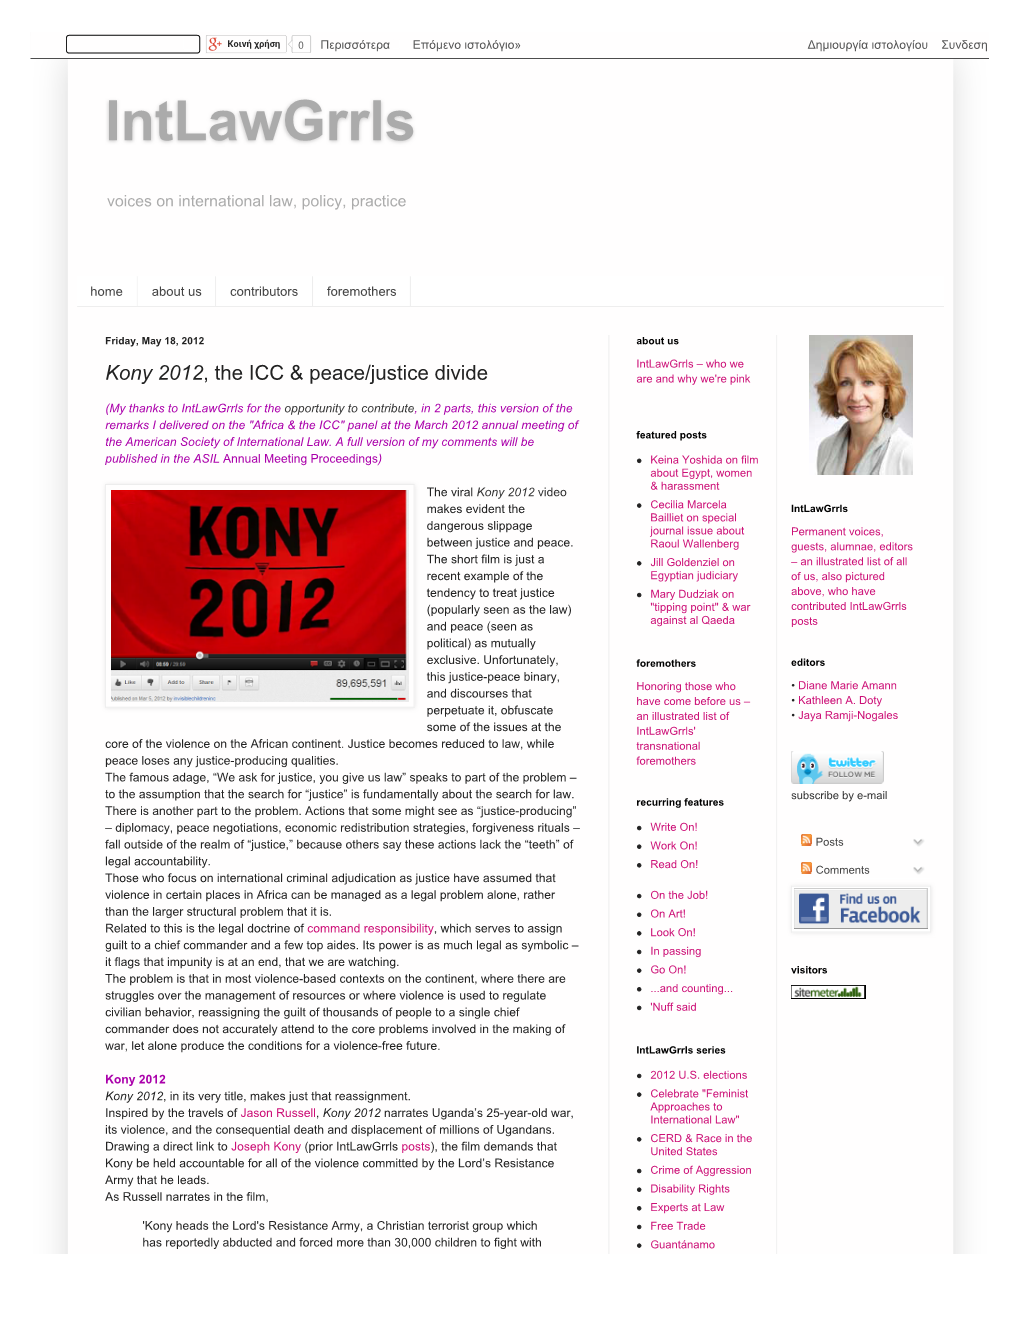 Kony 2012, the ICC & Peace/Justice Divide